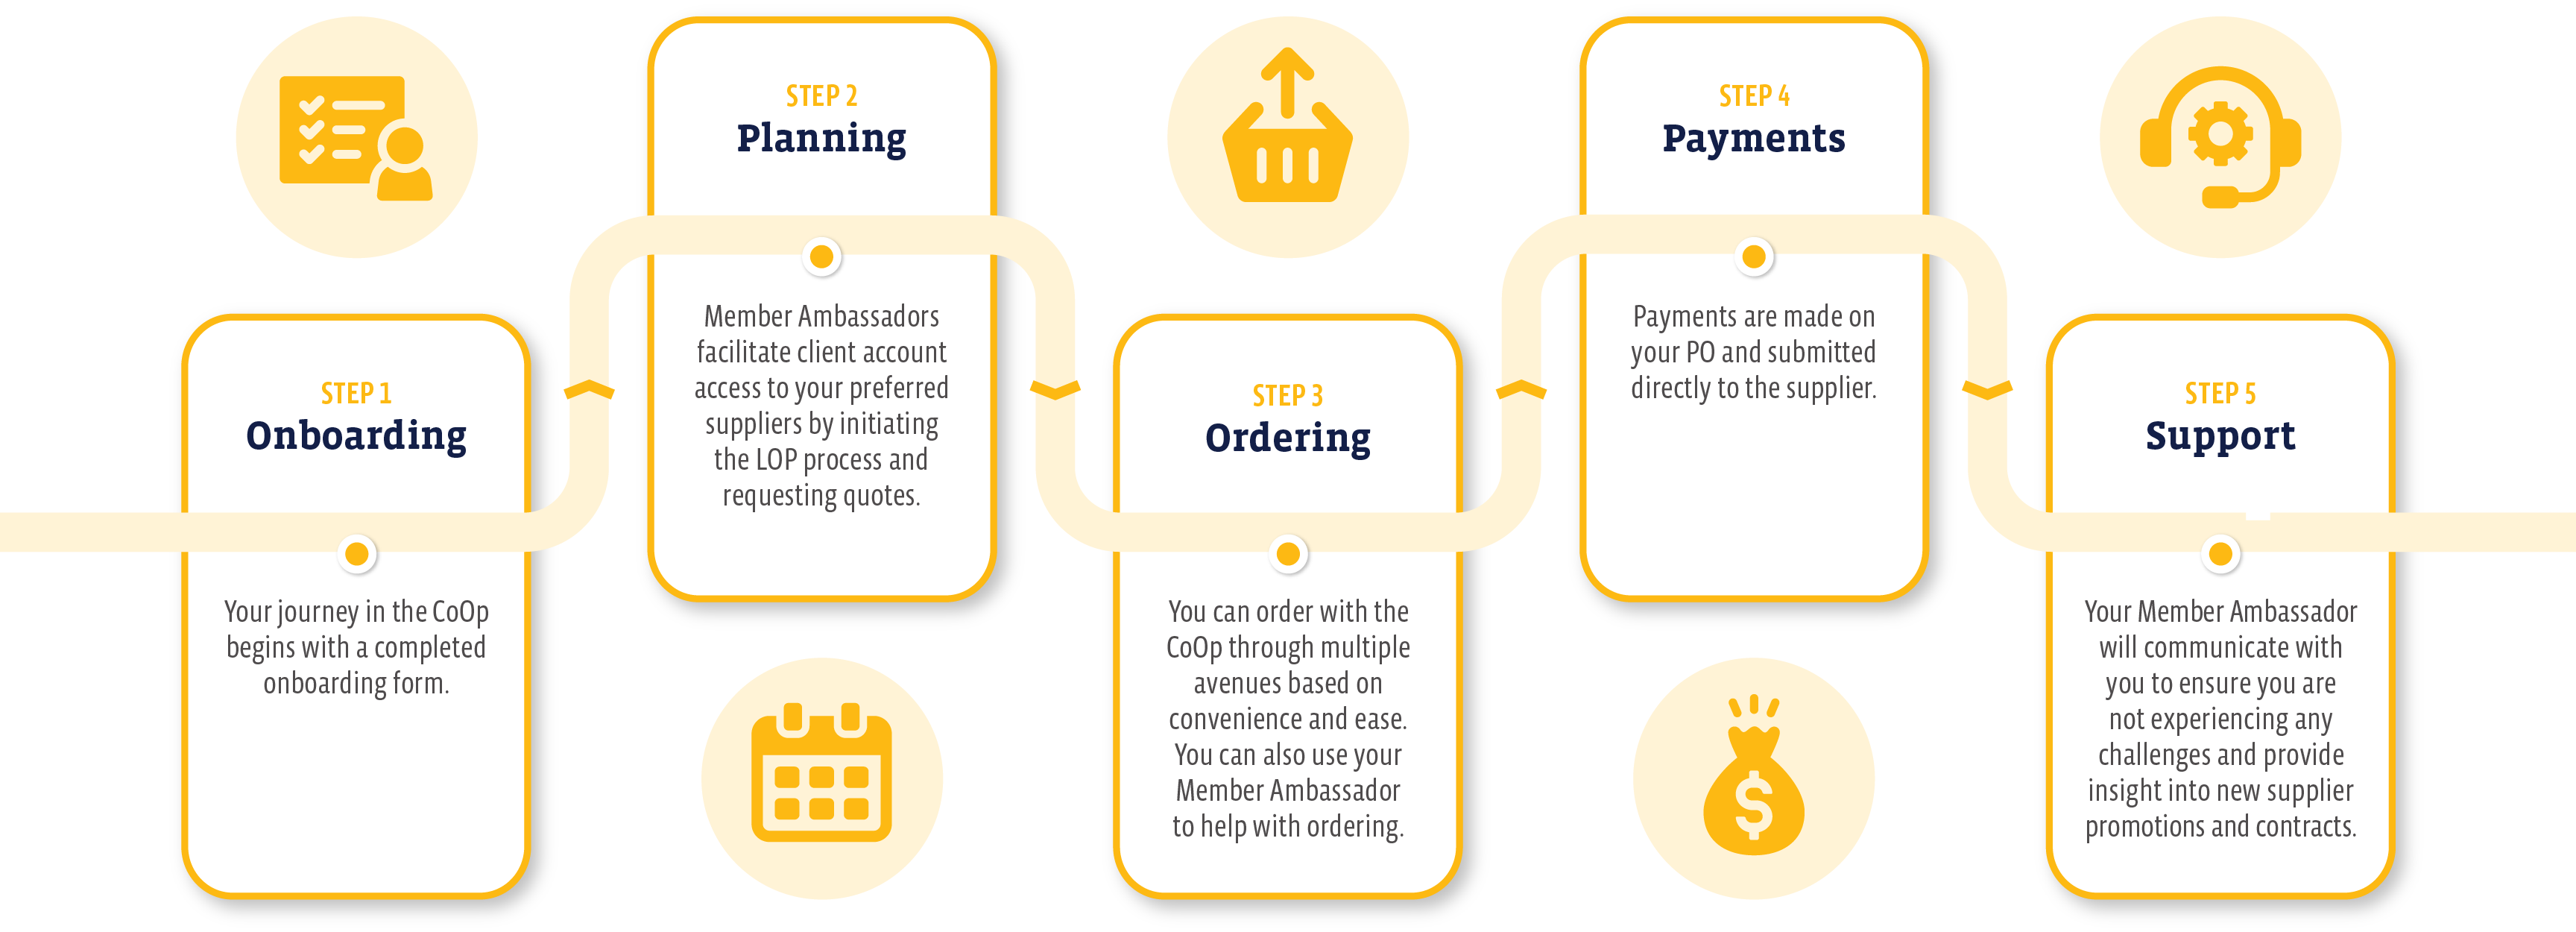 Onboarding, Planning, Ordering, Payments, Support